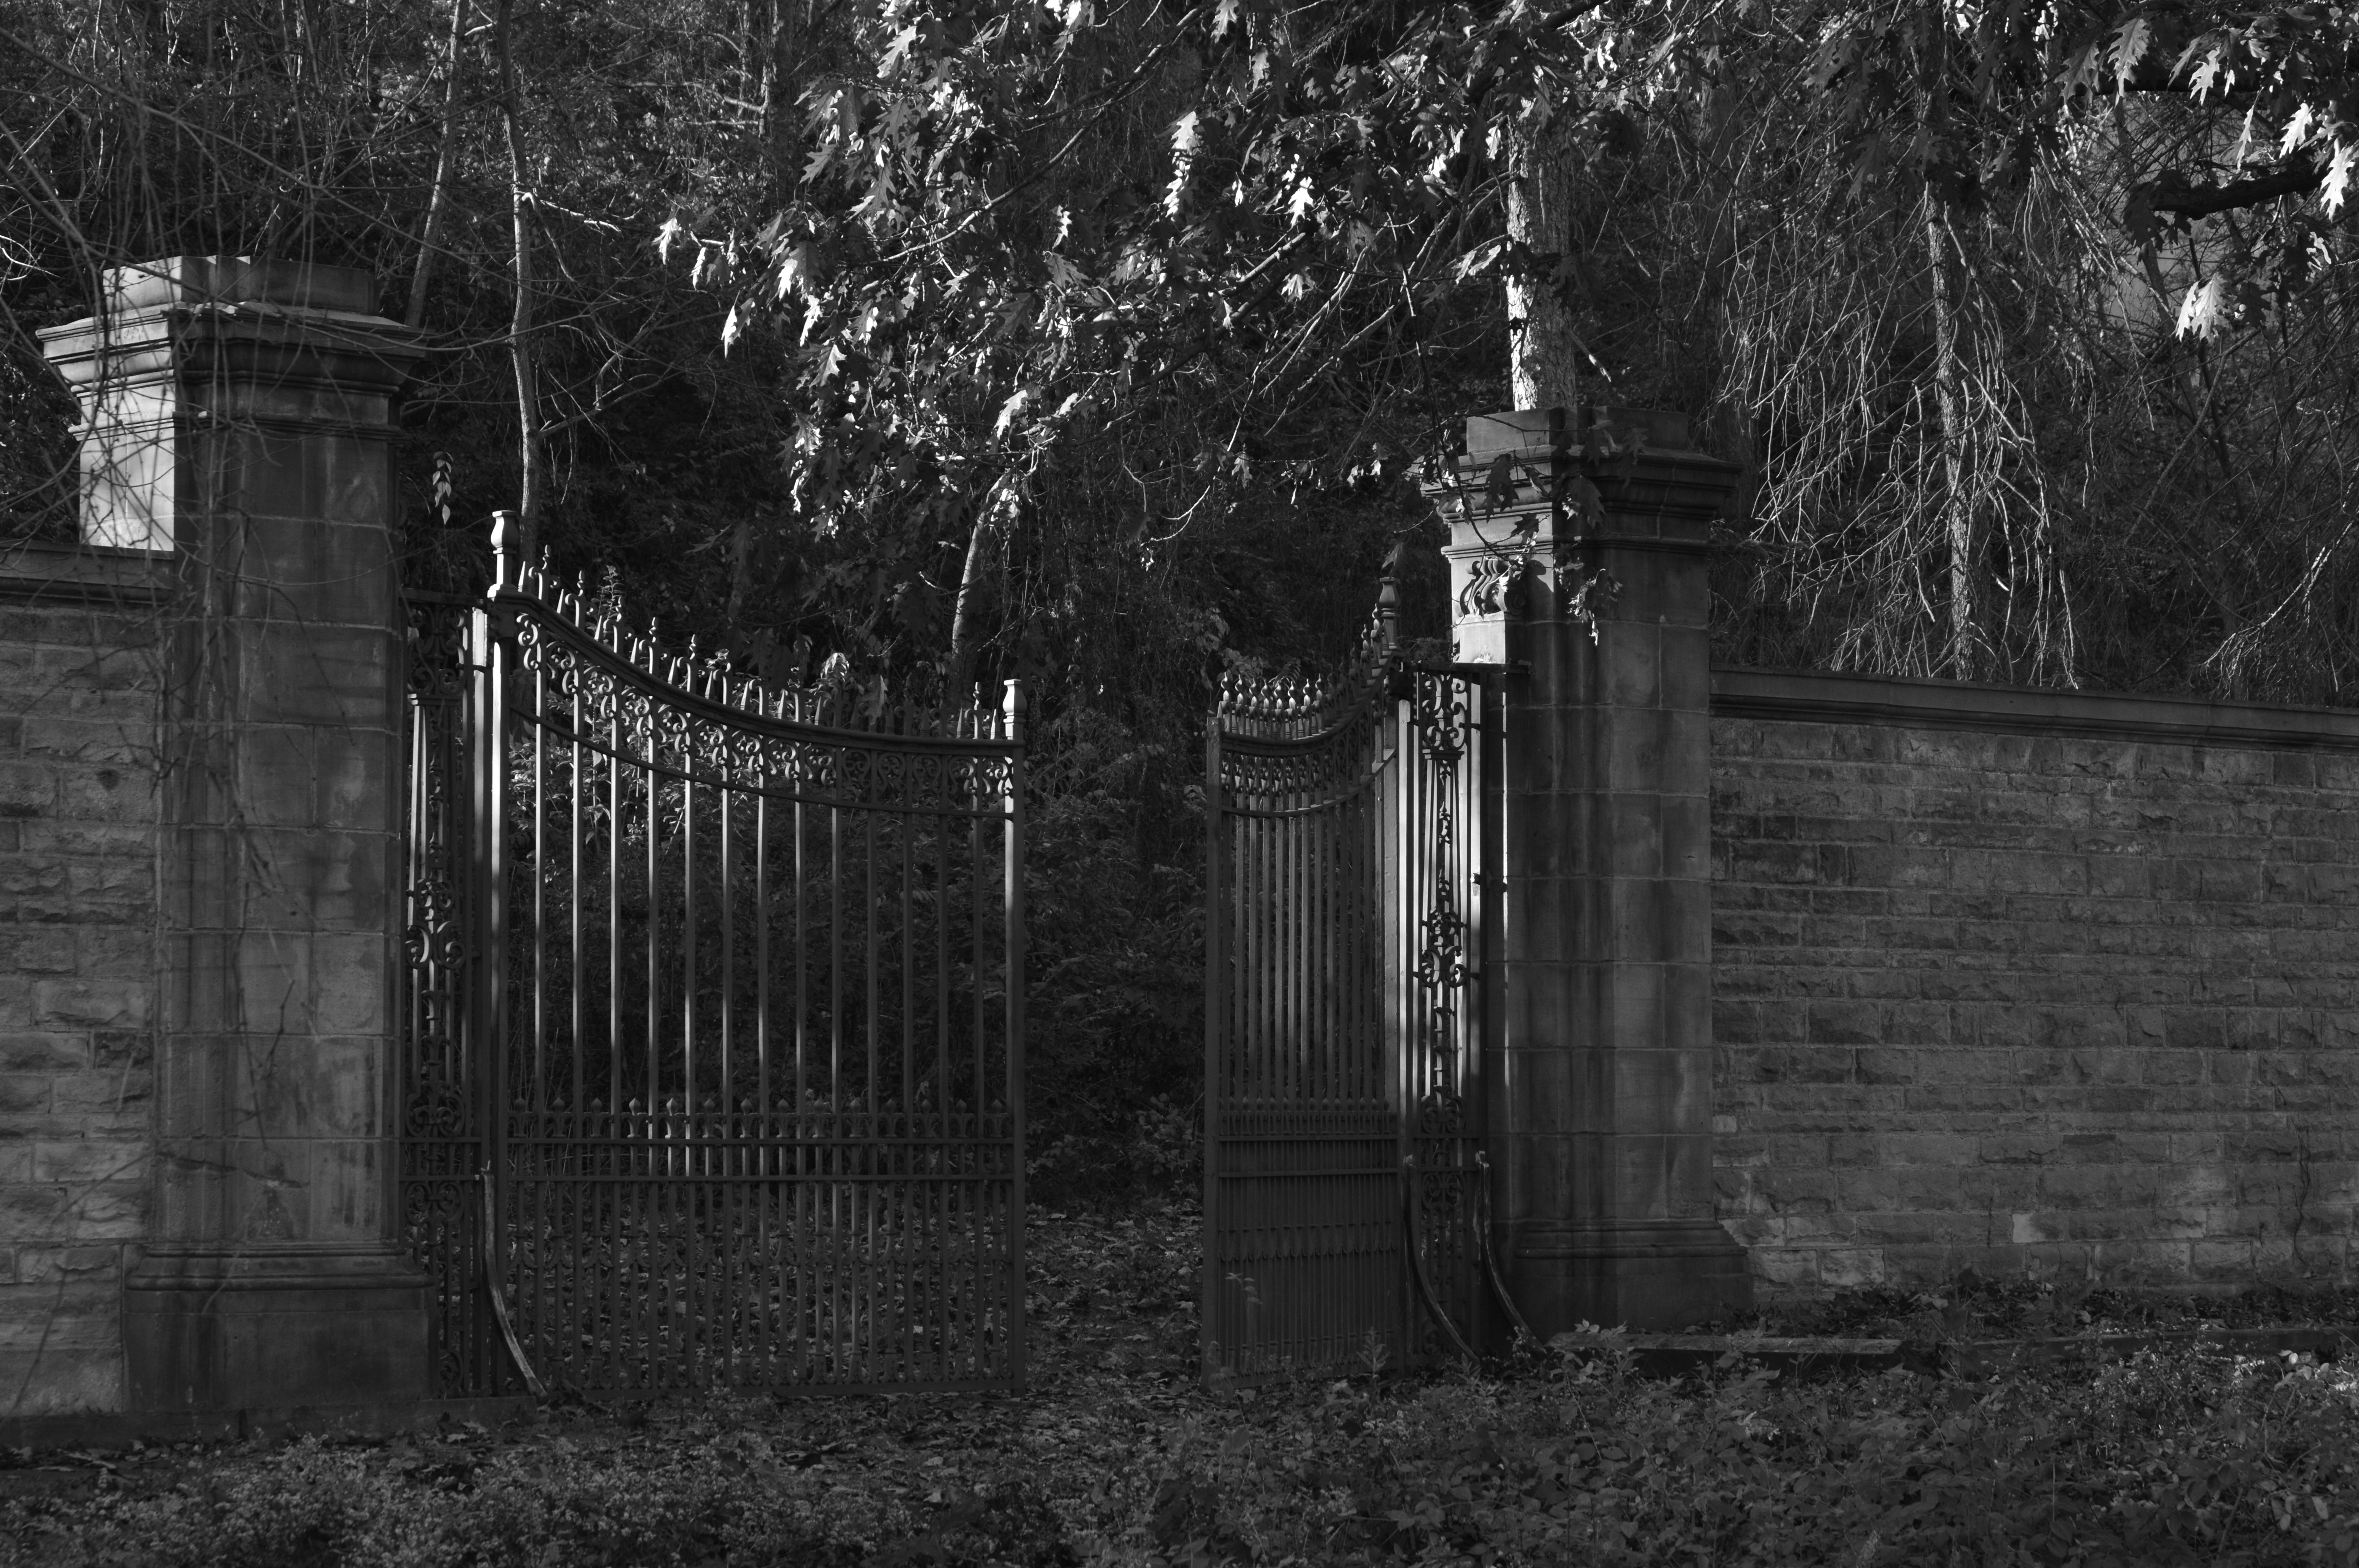 The haunted Louisville gate